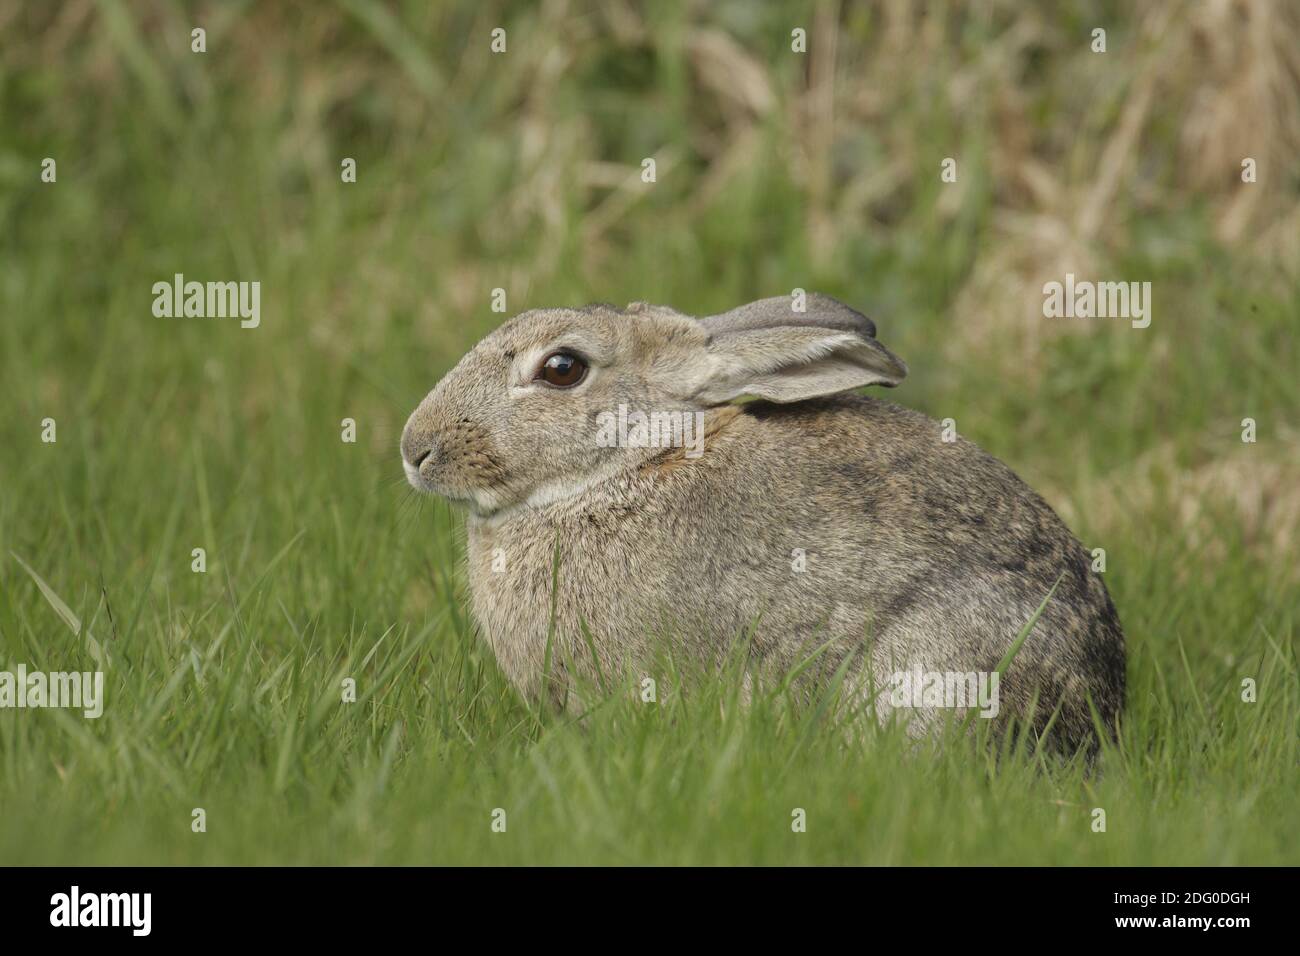 Wildkaninchen, Oryctolagus cuniculus, cotonmouth Banque D'Images